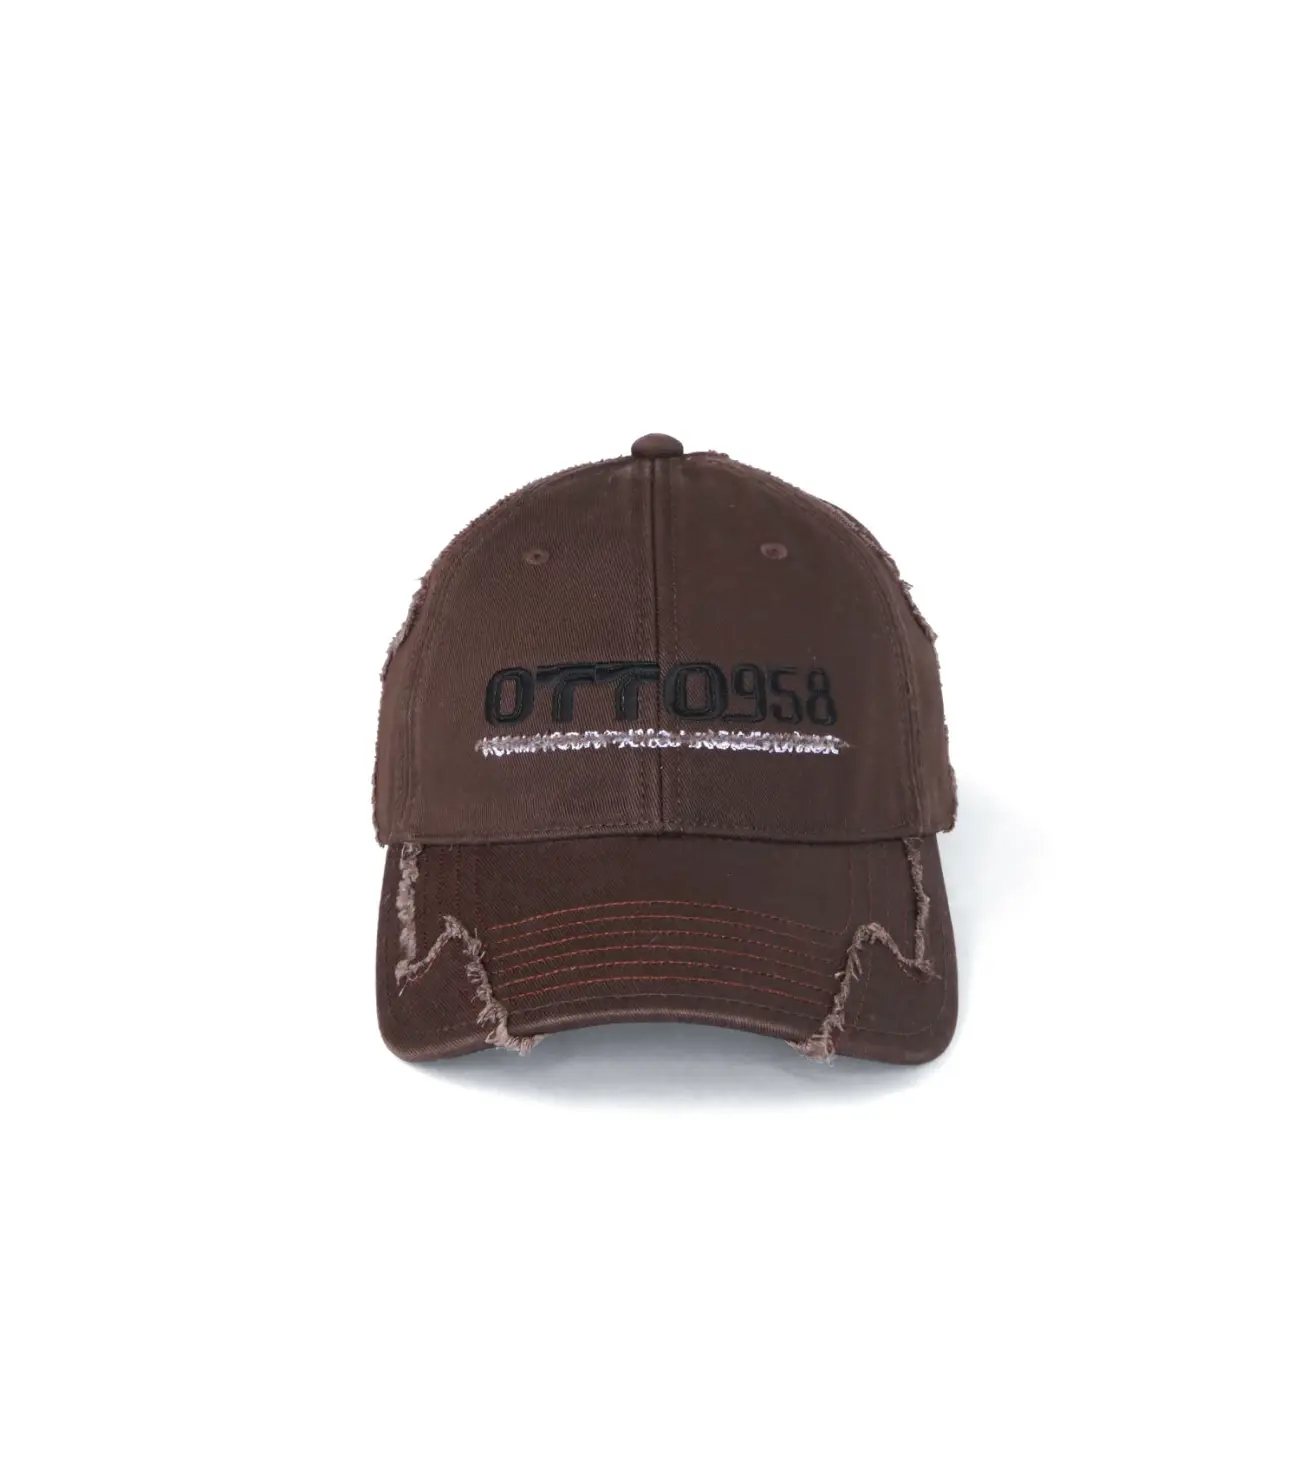 OTTO958 FIFTH GENERAL STORE HAT BROWN